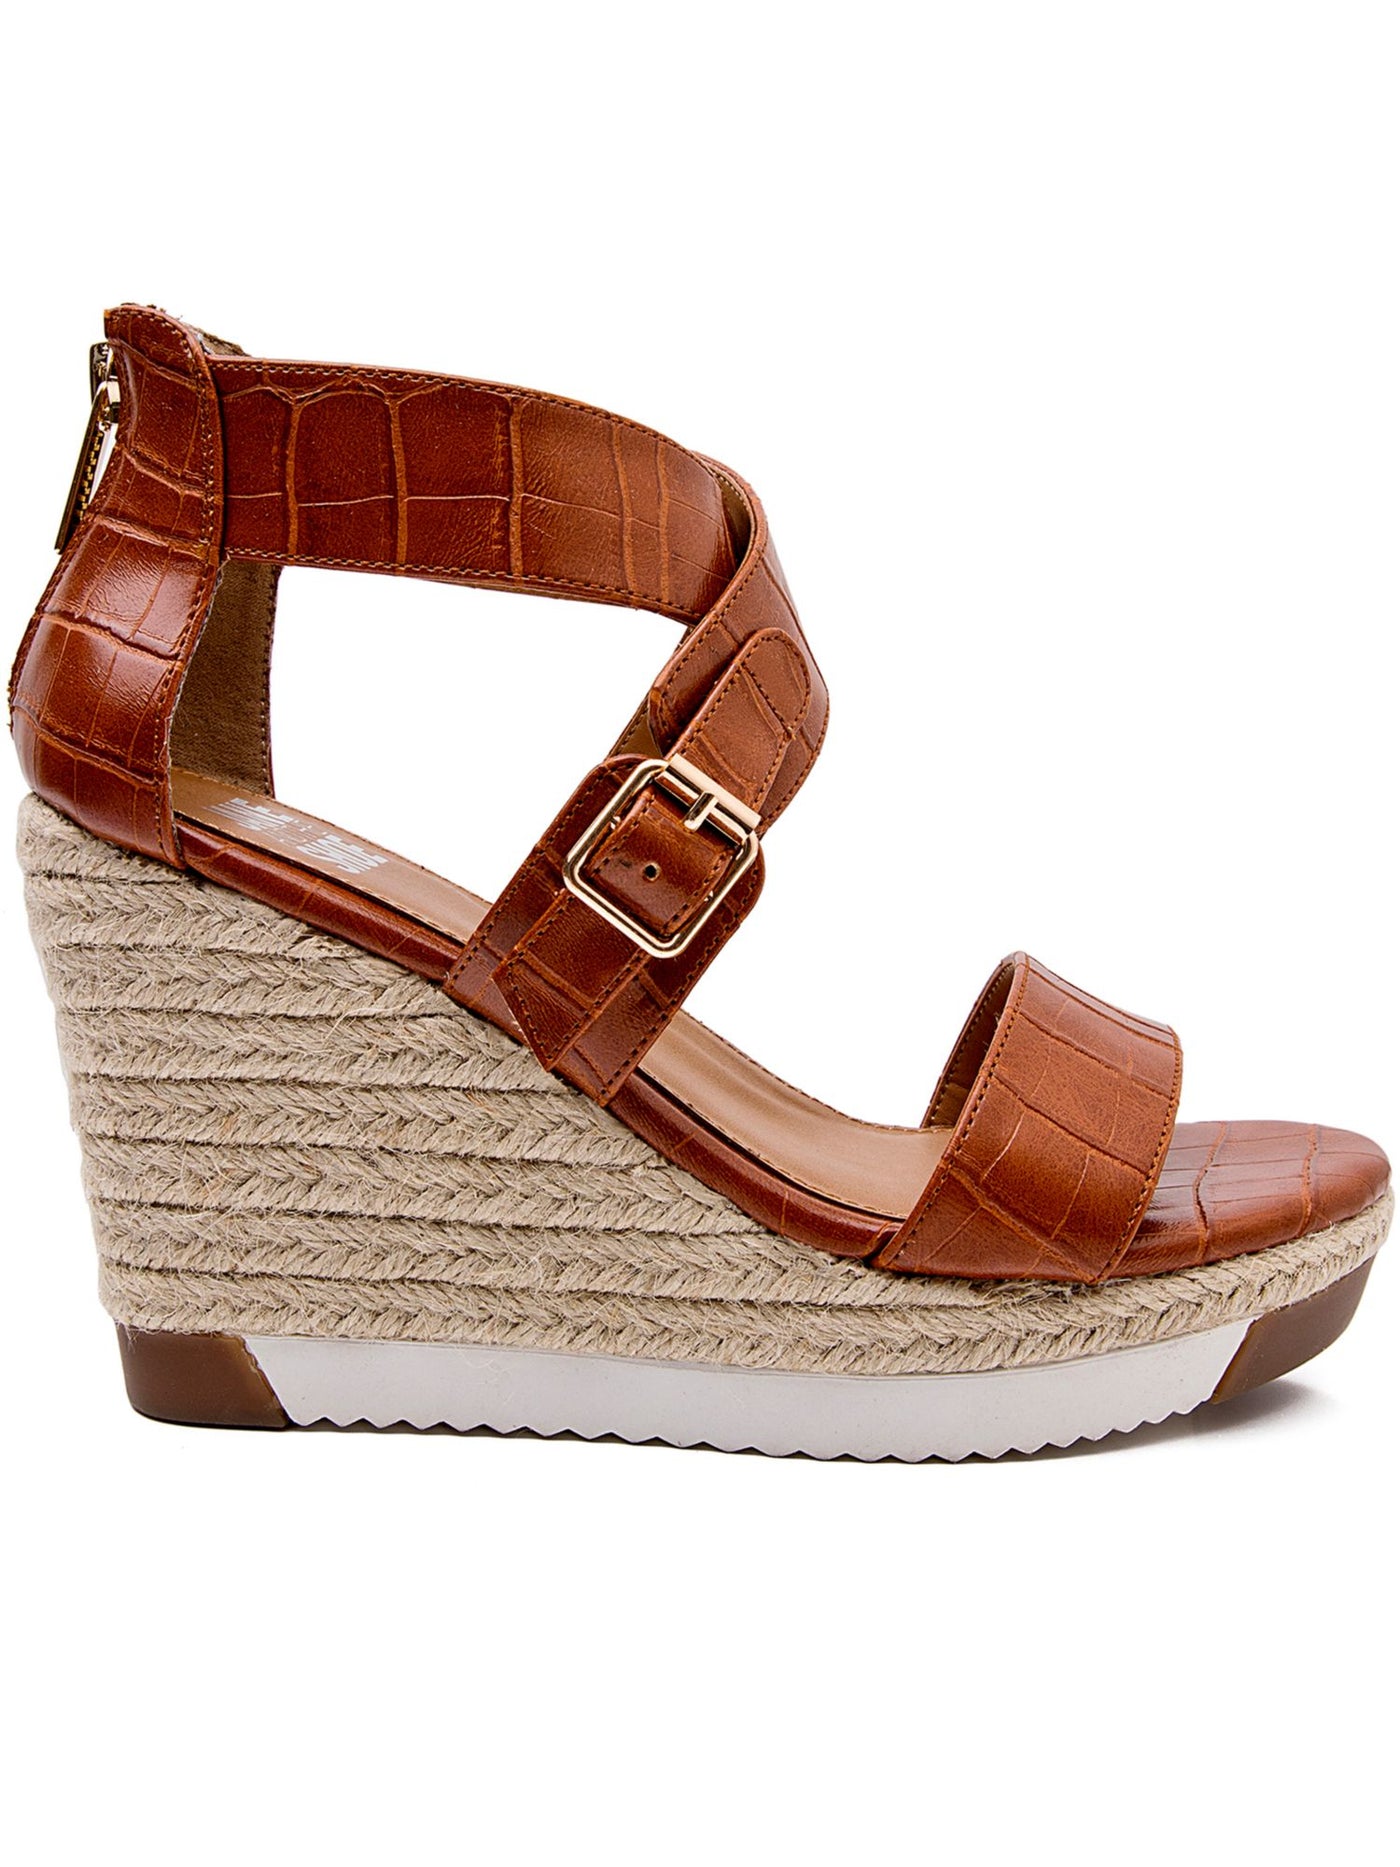 JANE AND THE SHOE Womens Brown Crocodile 1 Platform Buckle Accent Strappy Irma Round Toe Wedge Zip-Up Espadrille Shoes 8.5